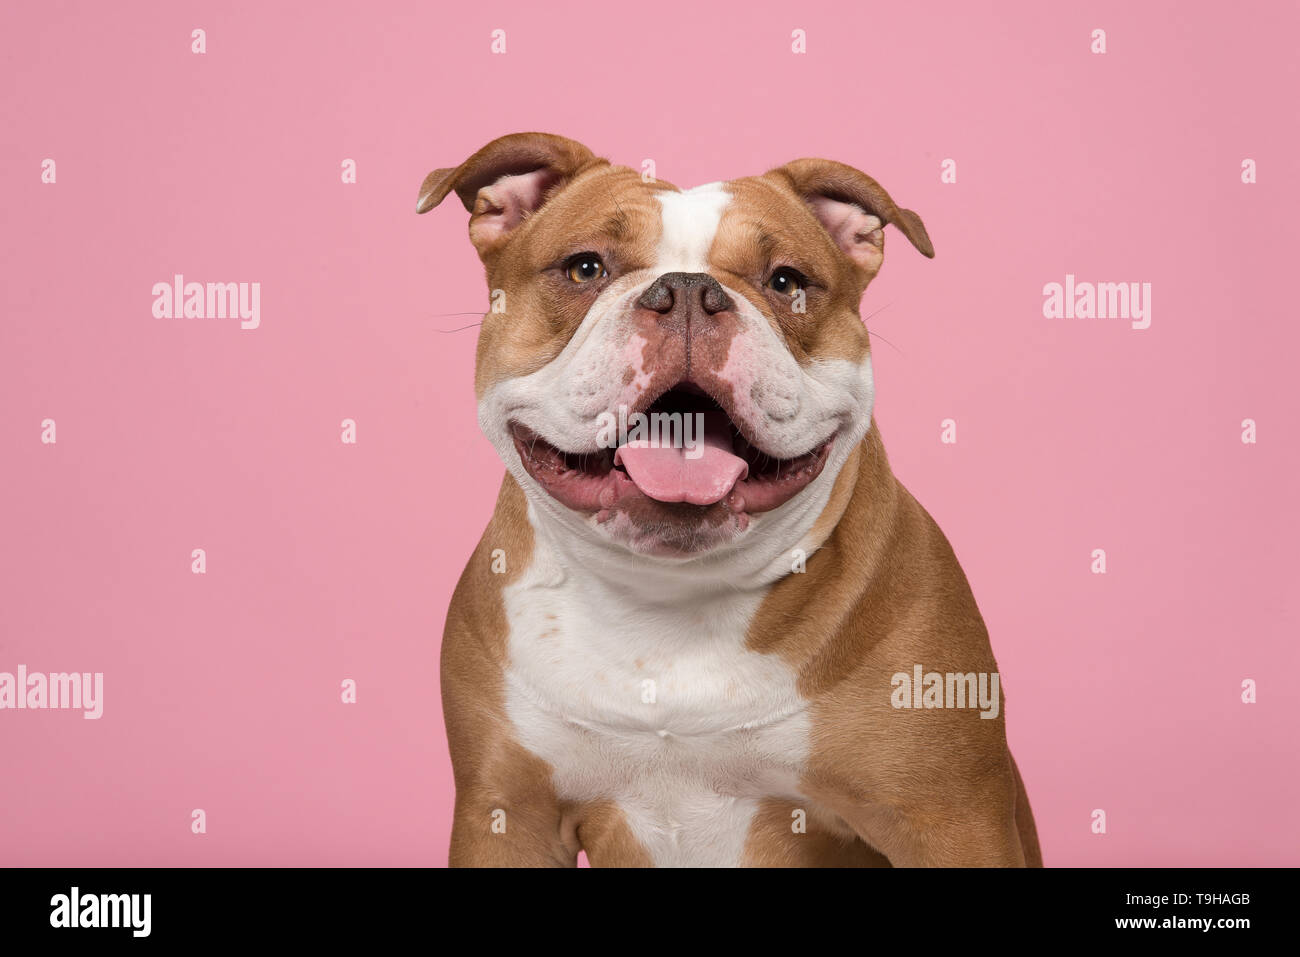 Portrait of an old english bulldog looking at the camera with a big smile on a pink background Stock Photo